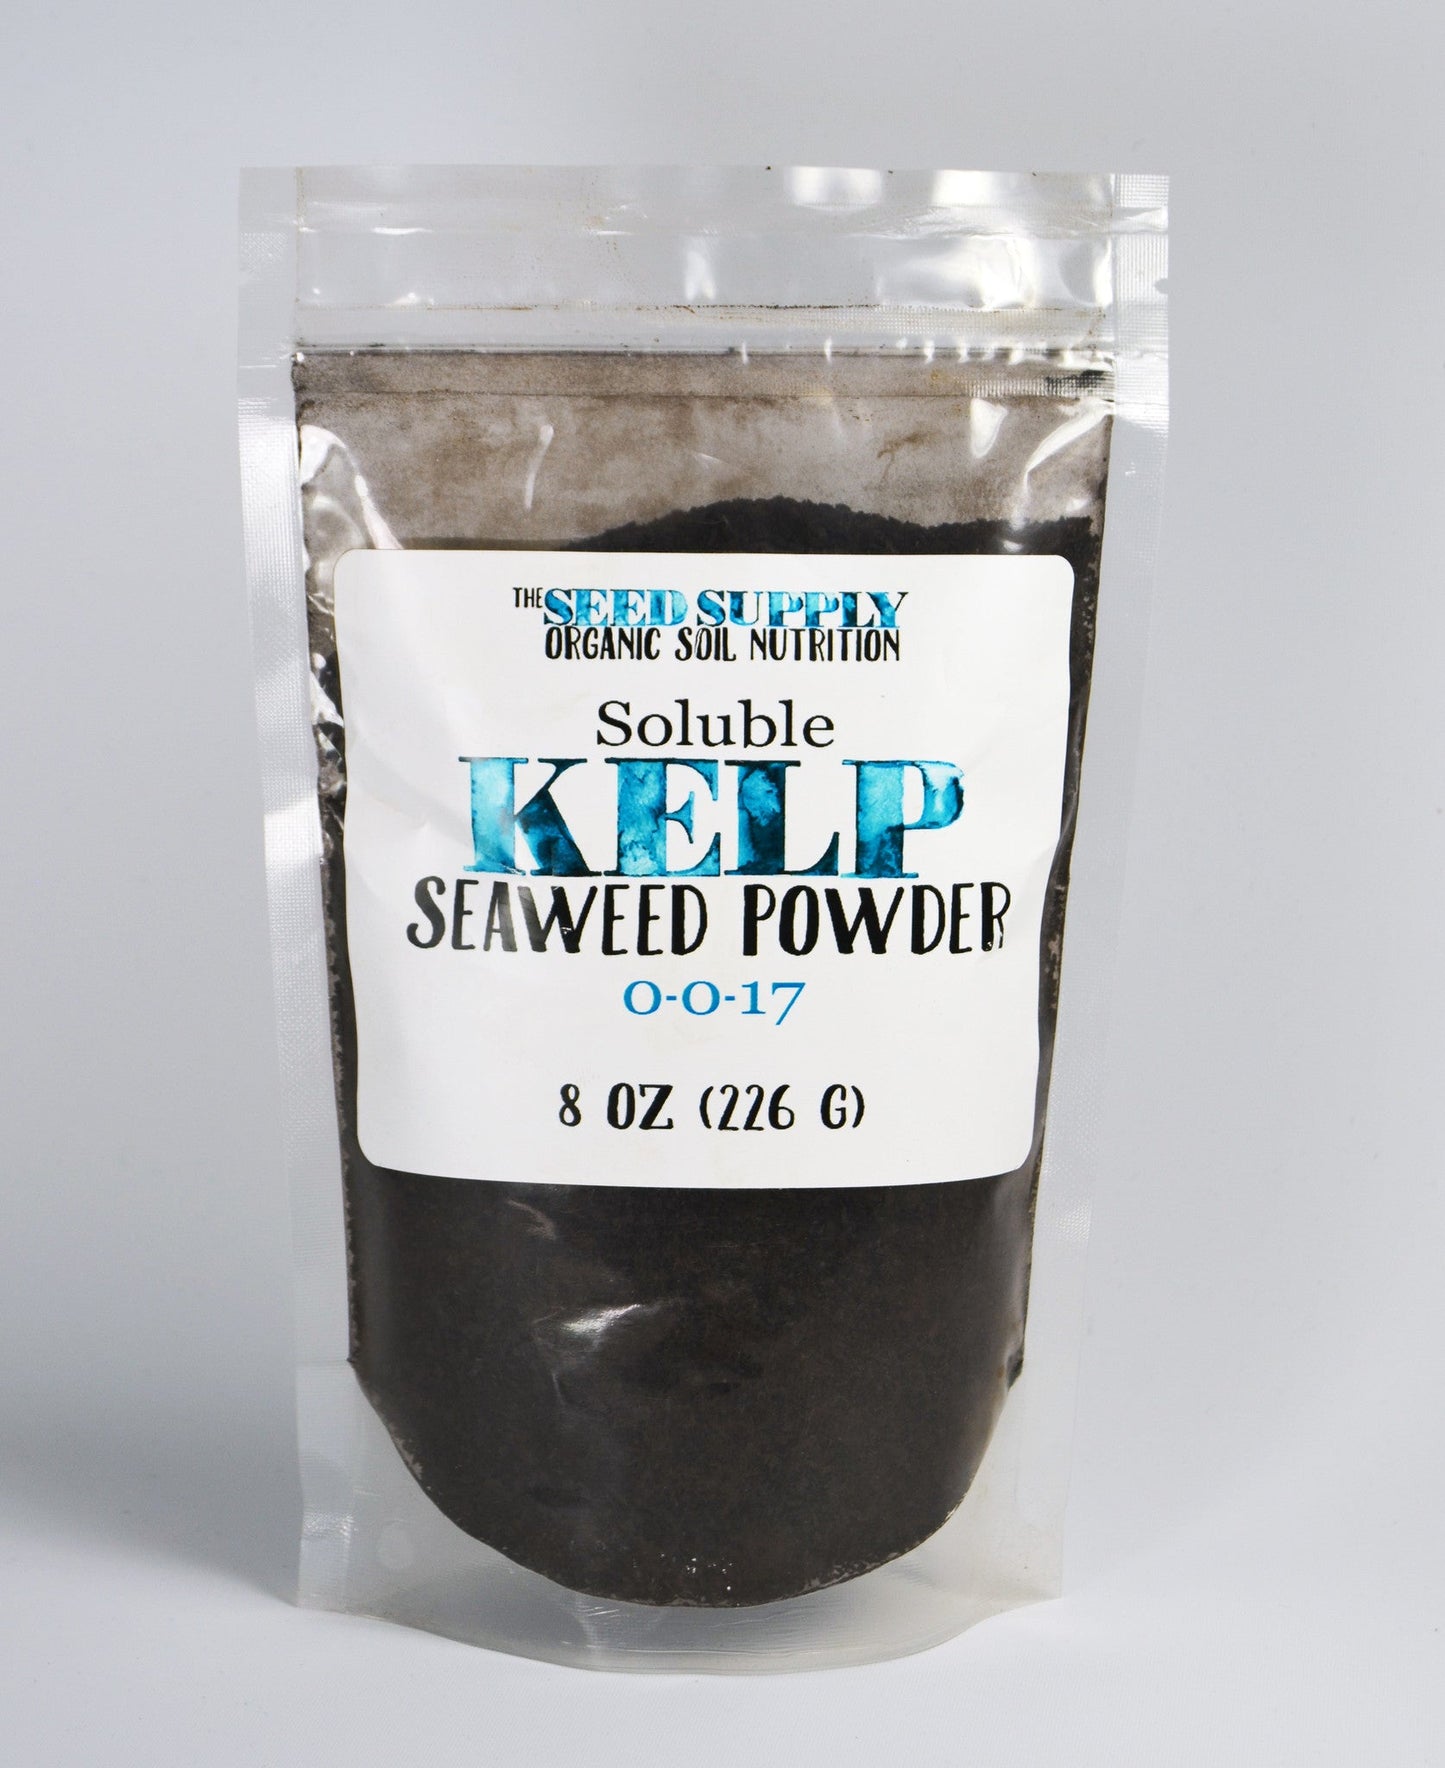 Soluble Kelp Powder - Seaweed Products - The Seed Supply - 5